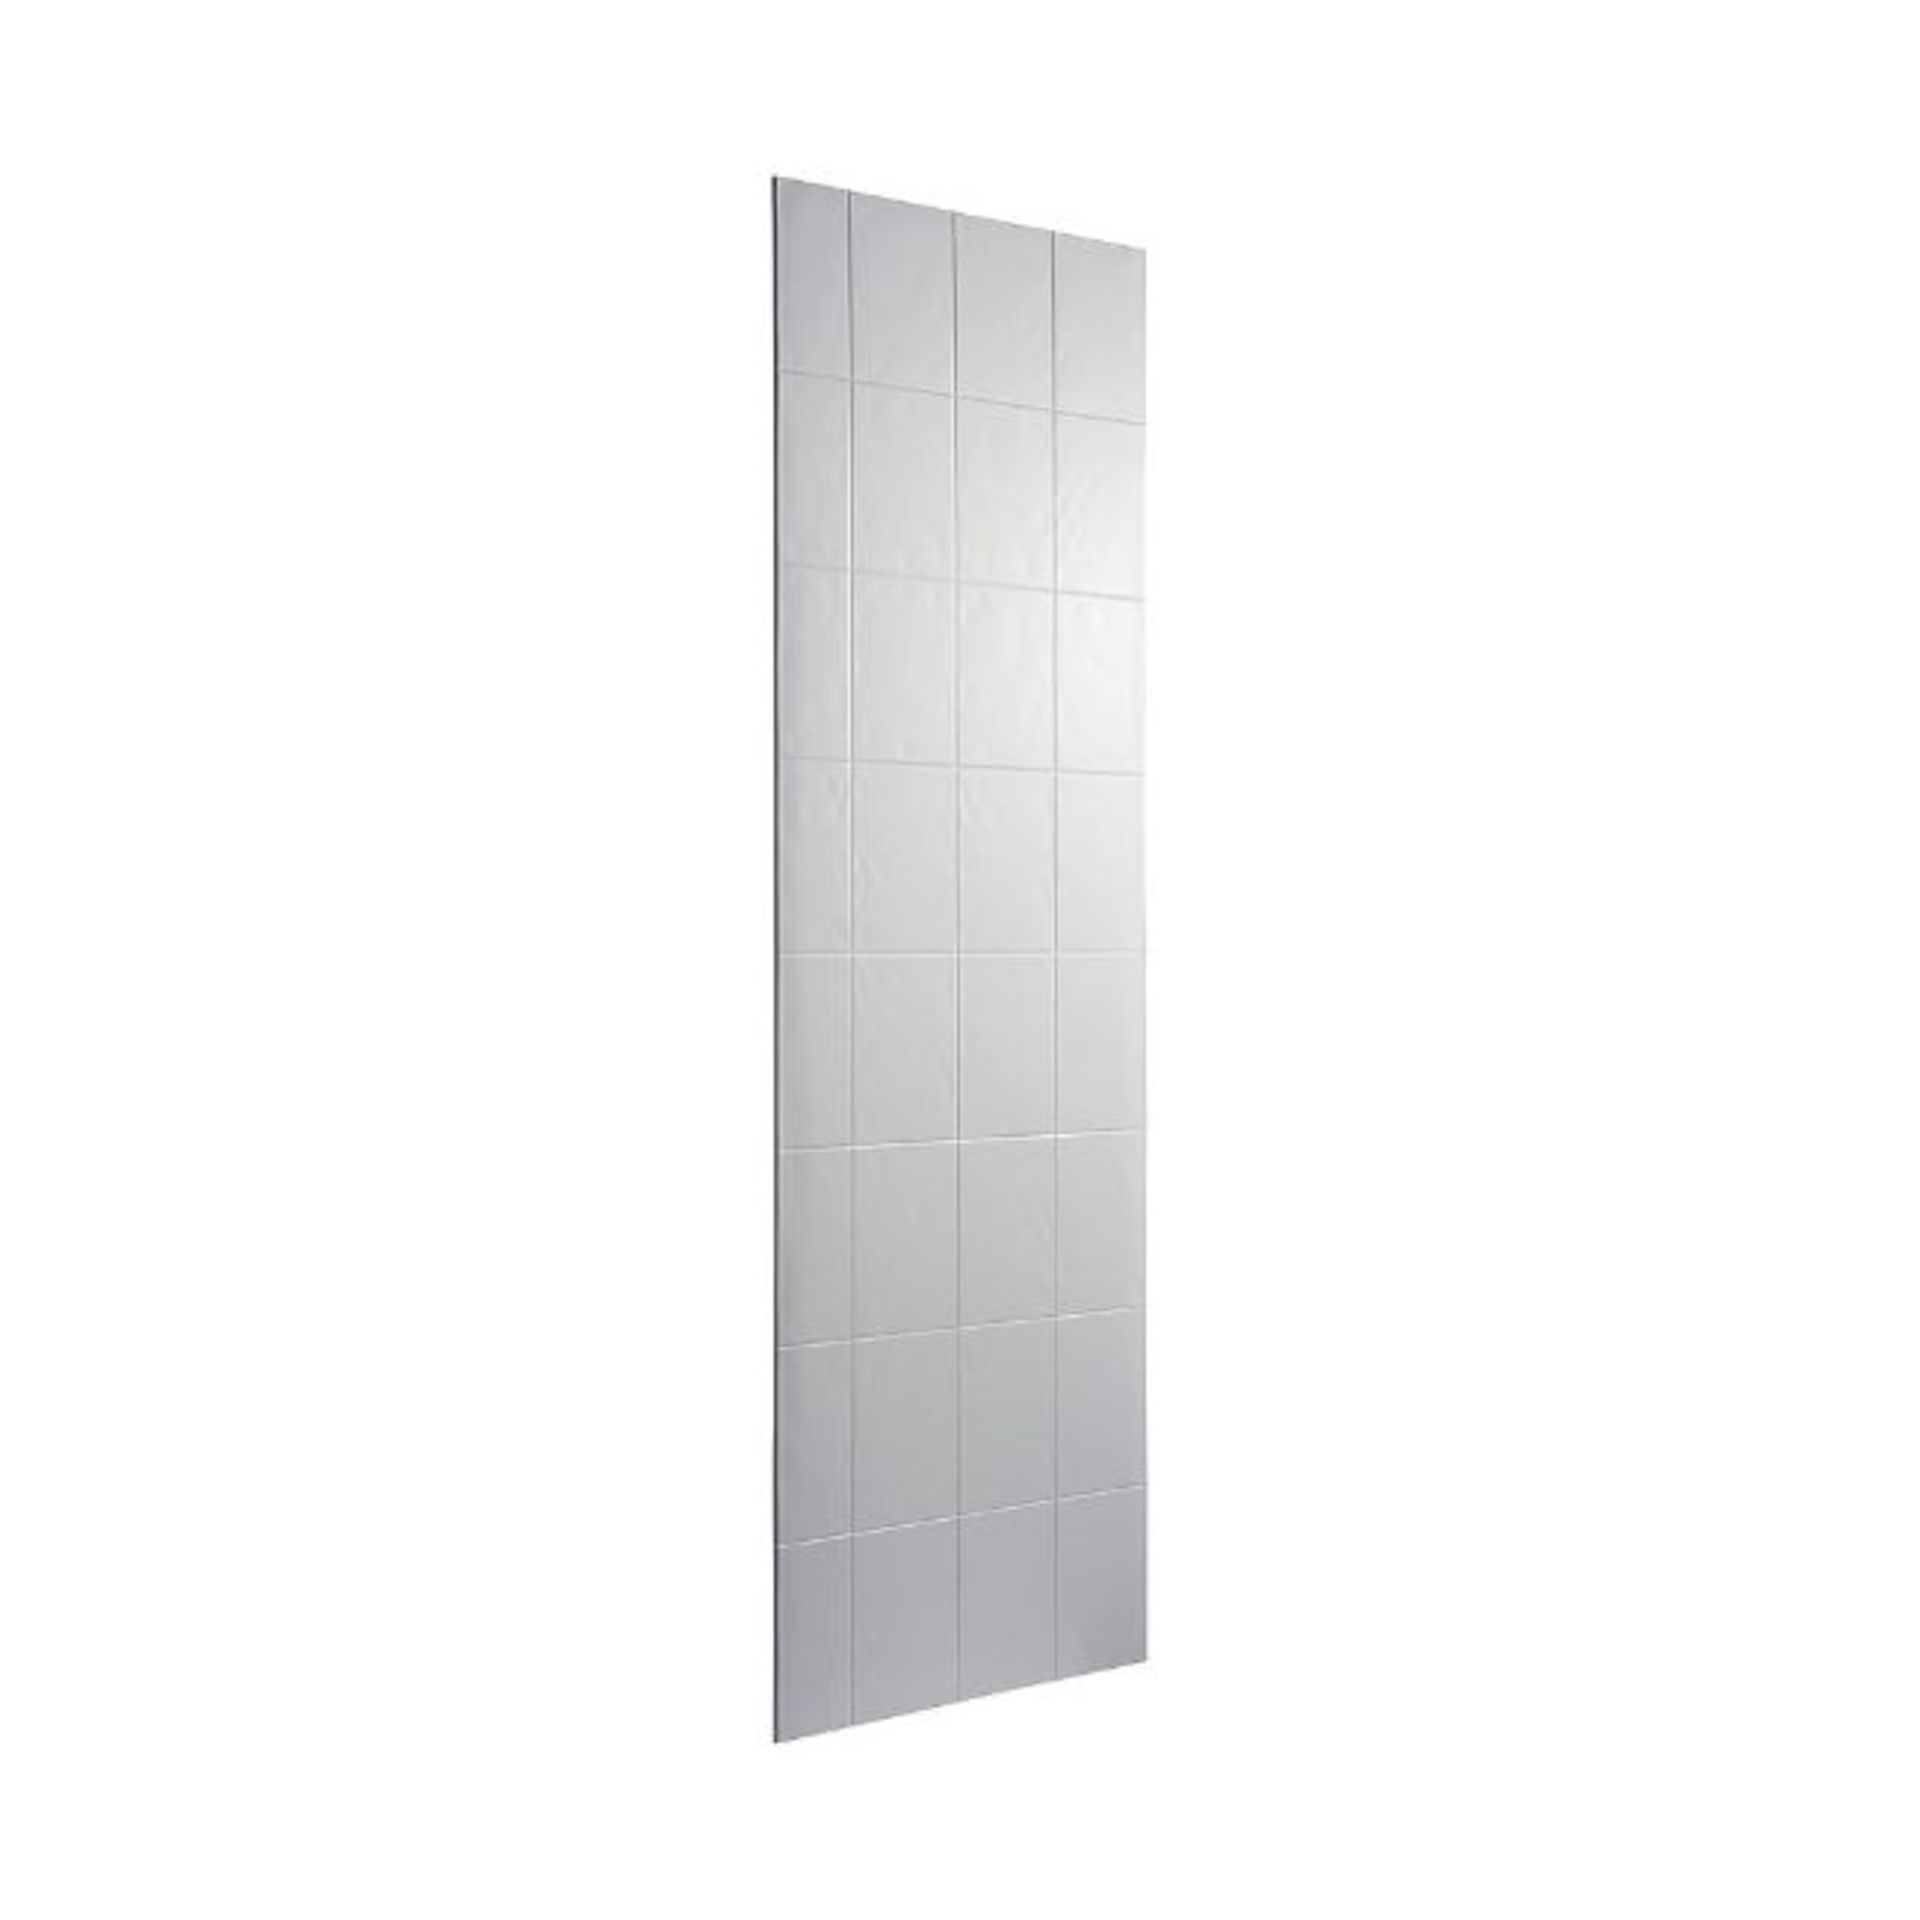 (Qp158) Mira Flight Wall Panel - 760 Full Height Wall / Wet room Panel. Rrp £353.99.The Hassle...